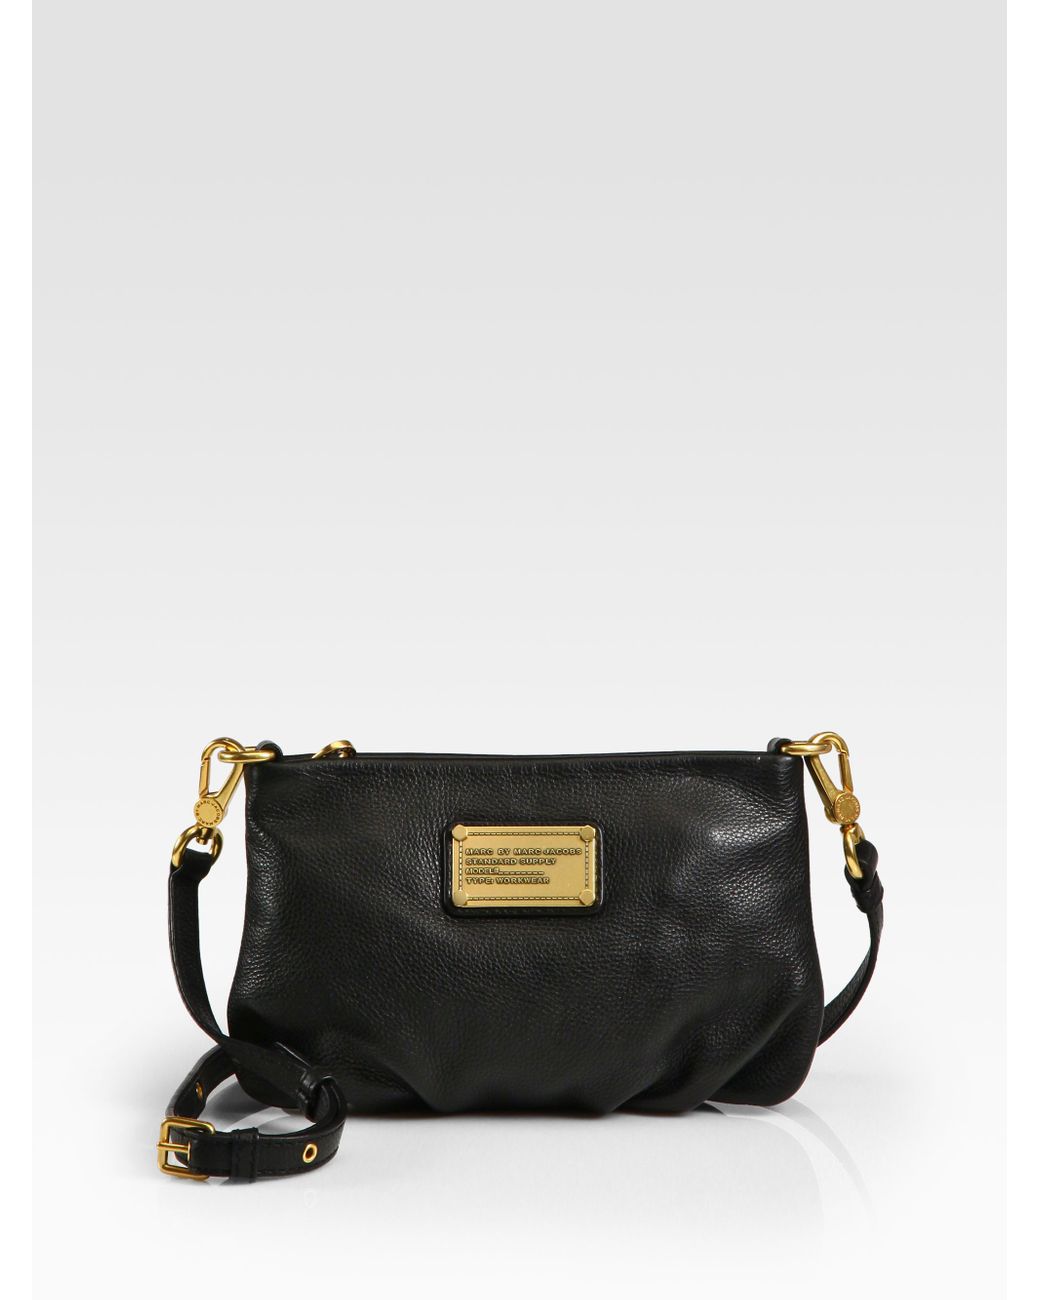 MARC BY MARC JACOBS バッグ | tspea.org